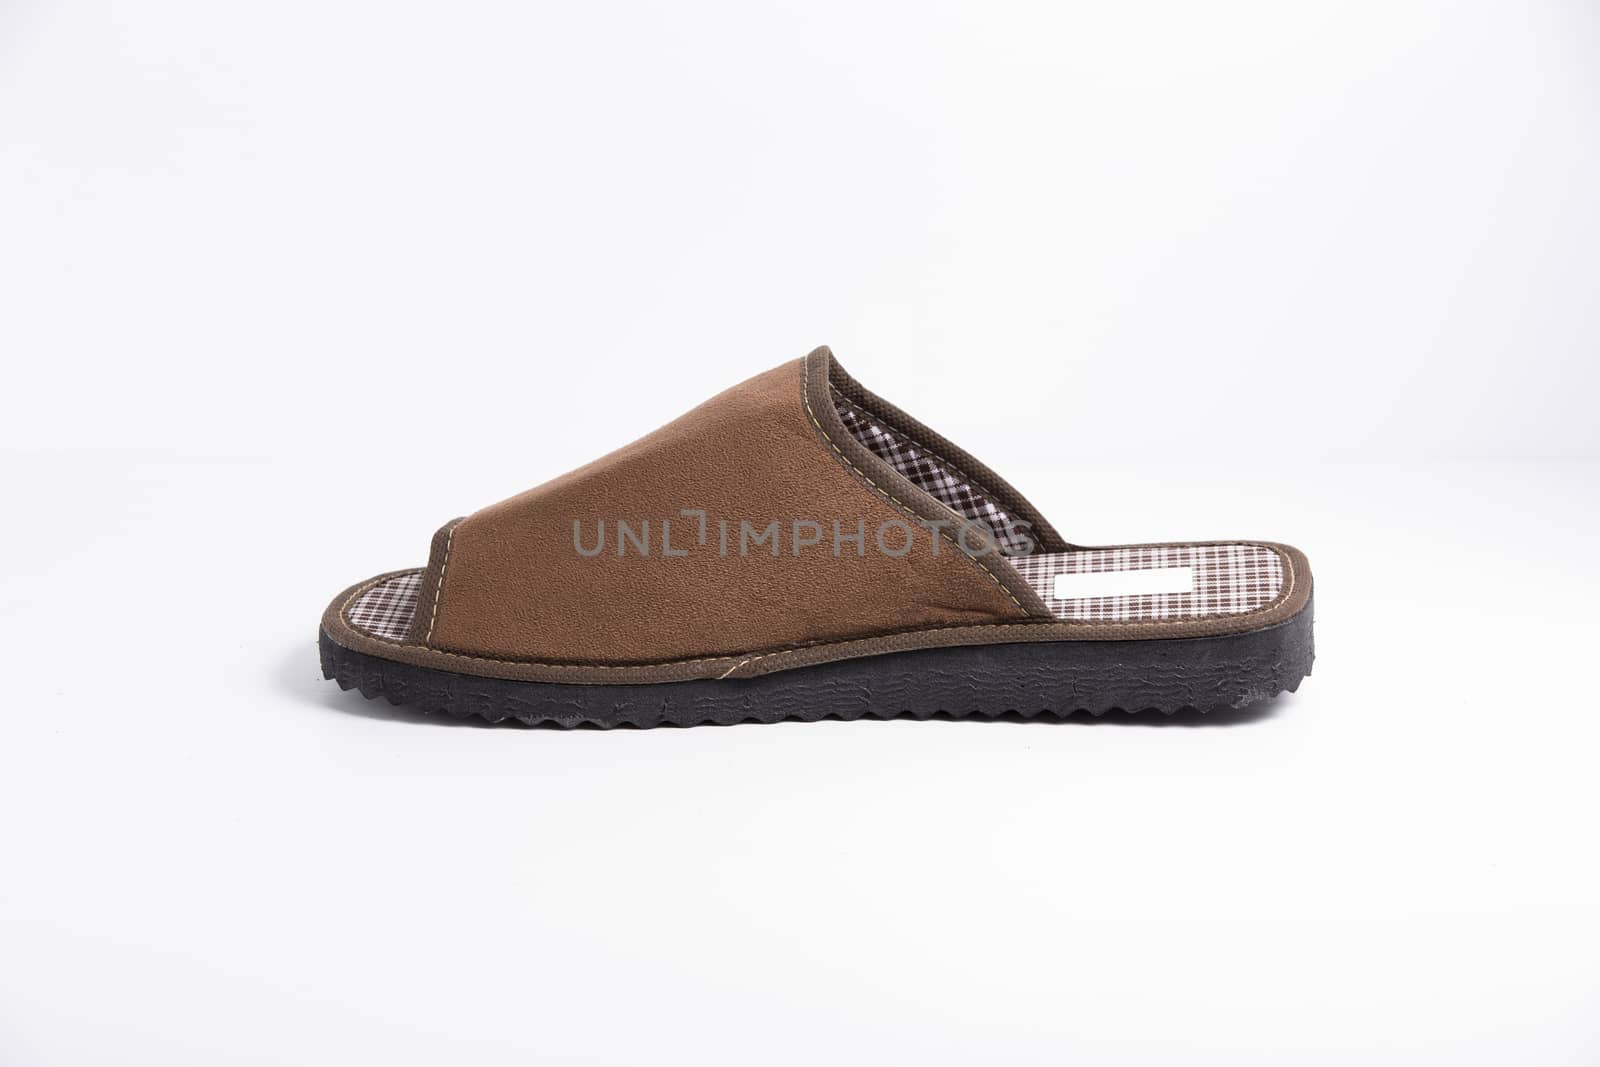 Male brown slipper on white background, isolated product.